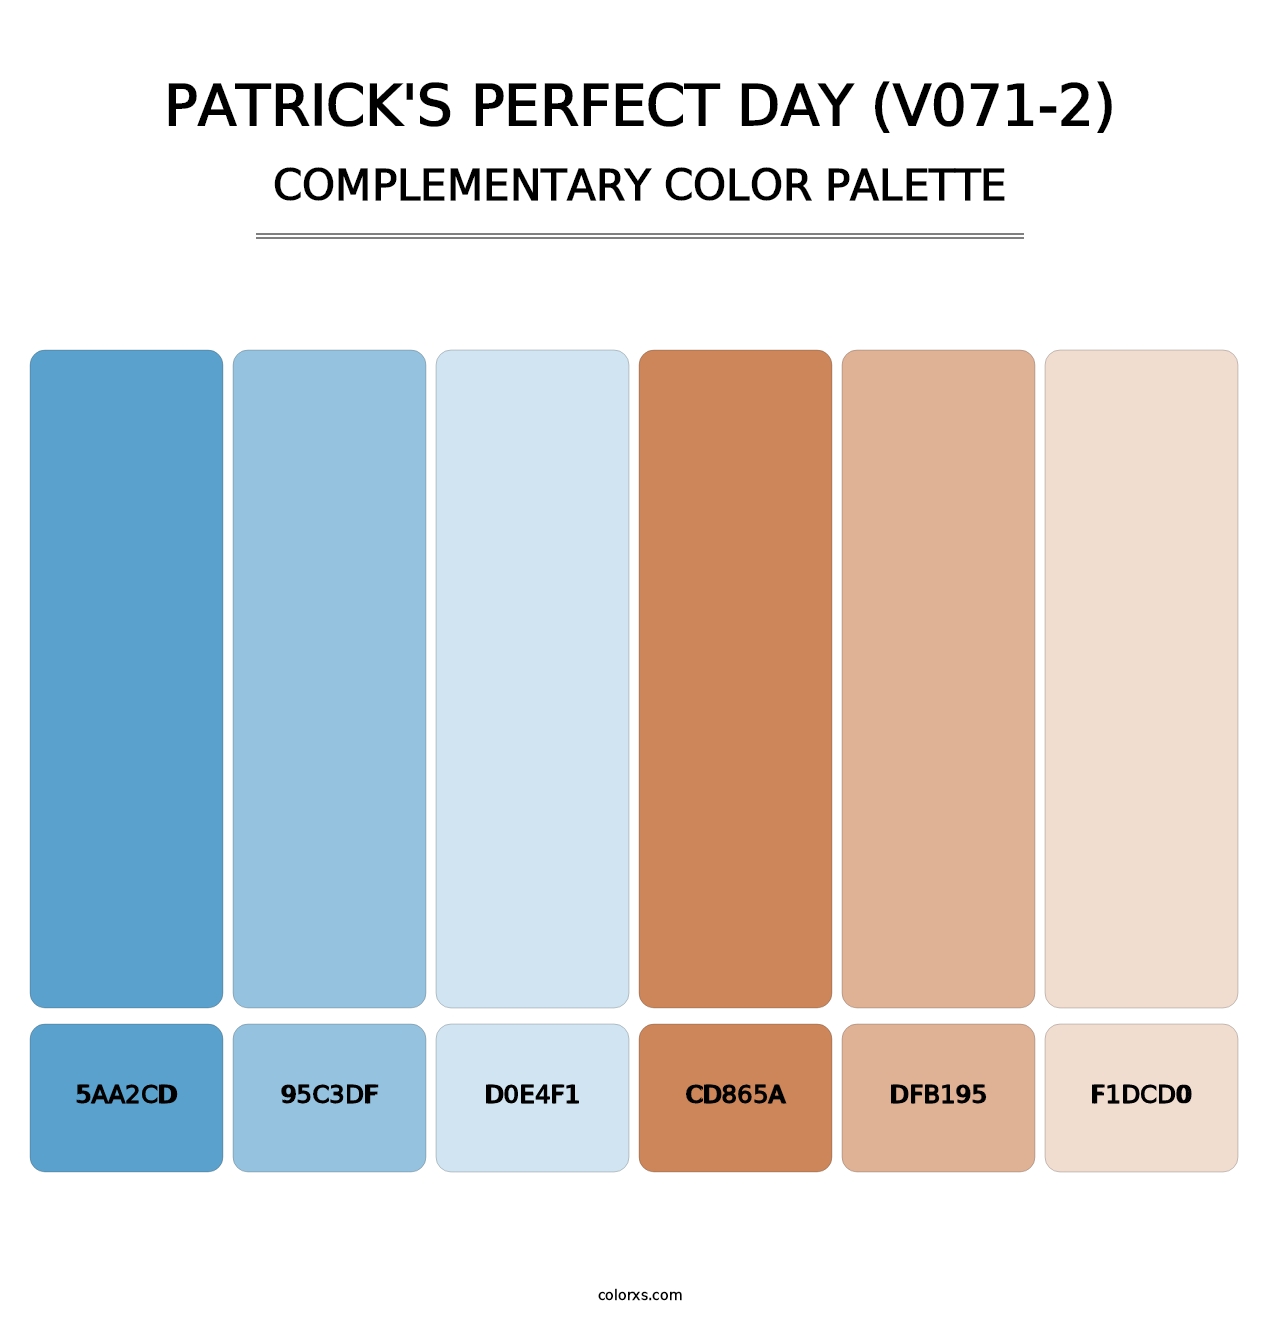 Patrick's Perfect Day (V071-2) - Complementary Color Palette